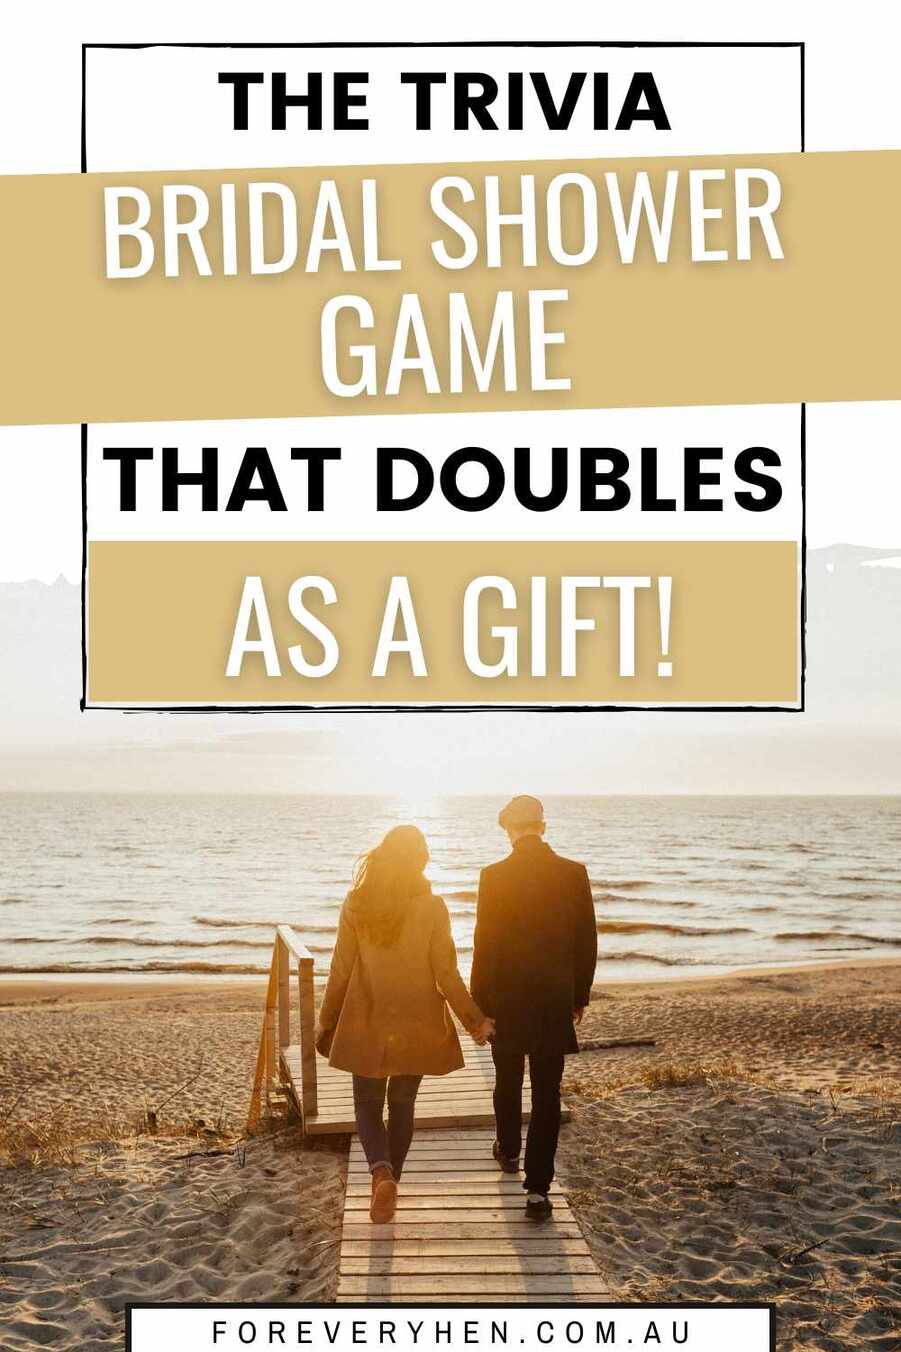 A couple holding hands and walking on the beach. Text overlay: The trivia bridal shower game that doubles as a gift!